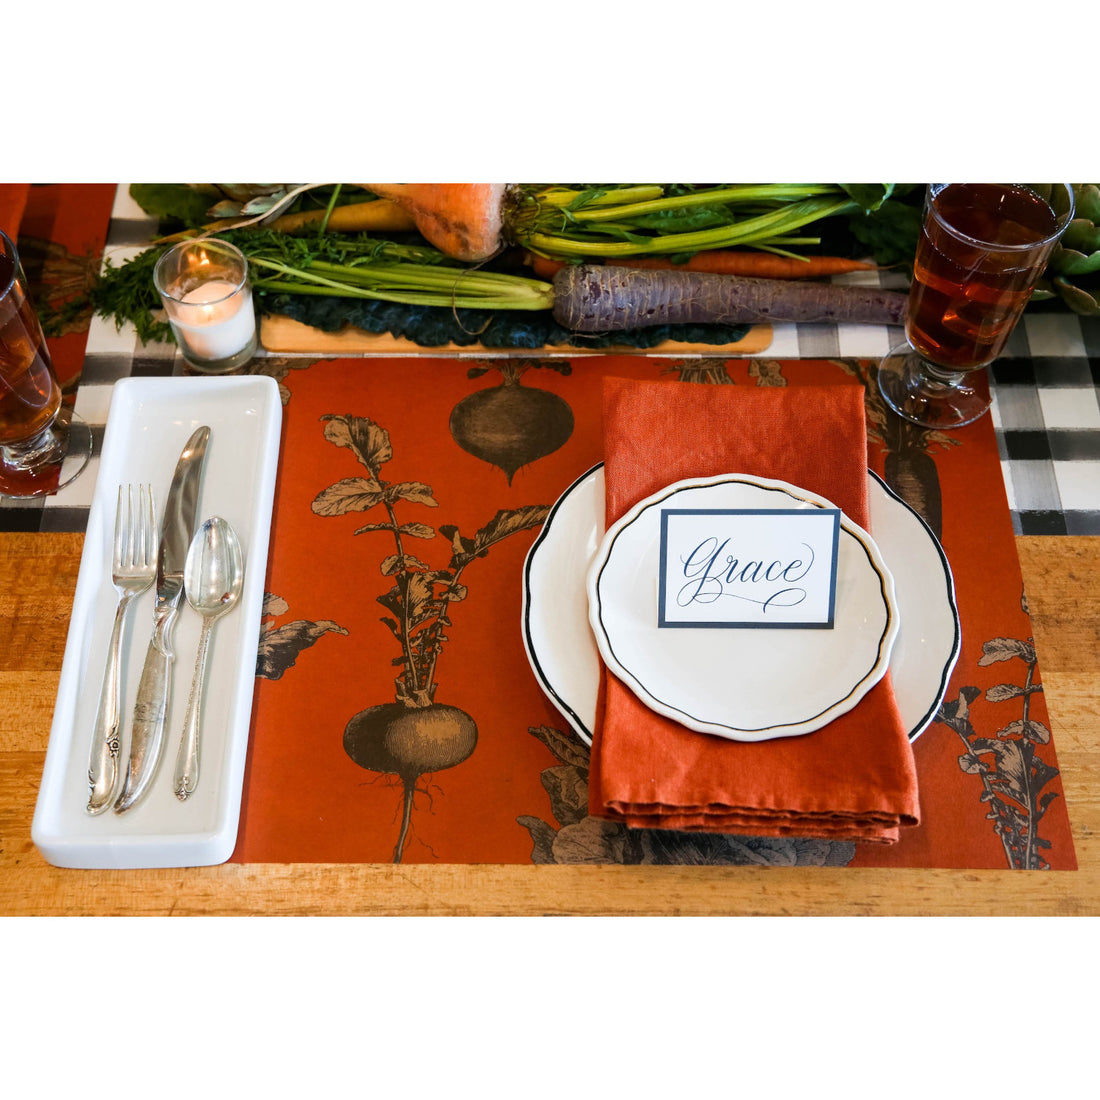 The Harvest Vegetable (Persimmon) Placemat under a rustic place setting.